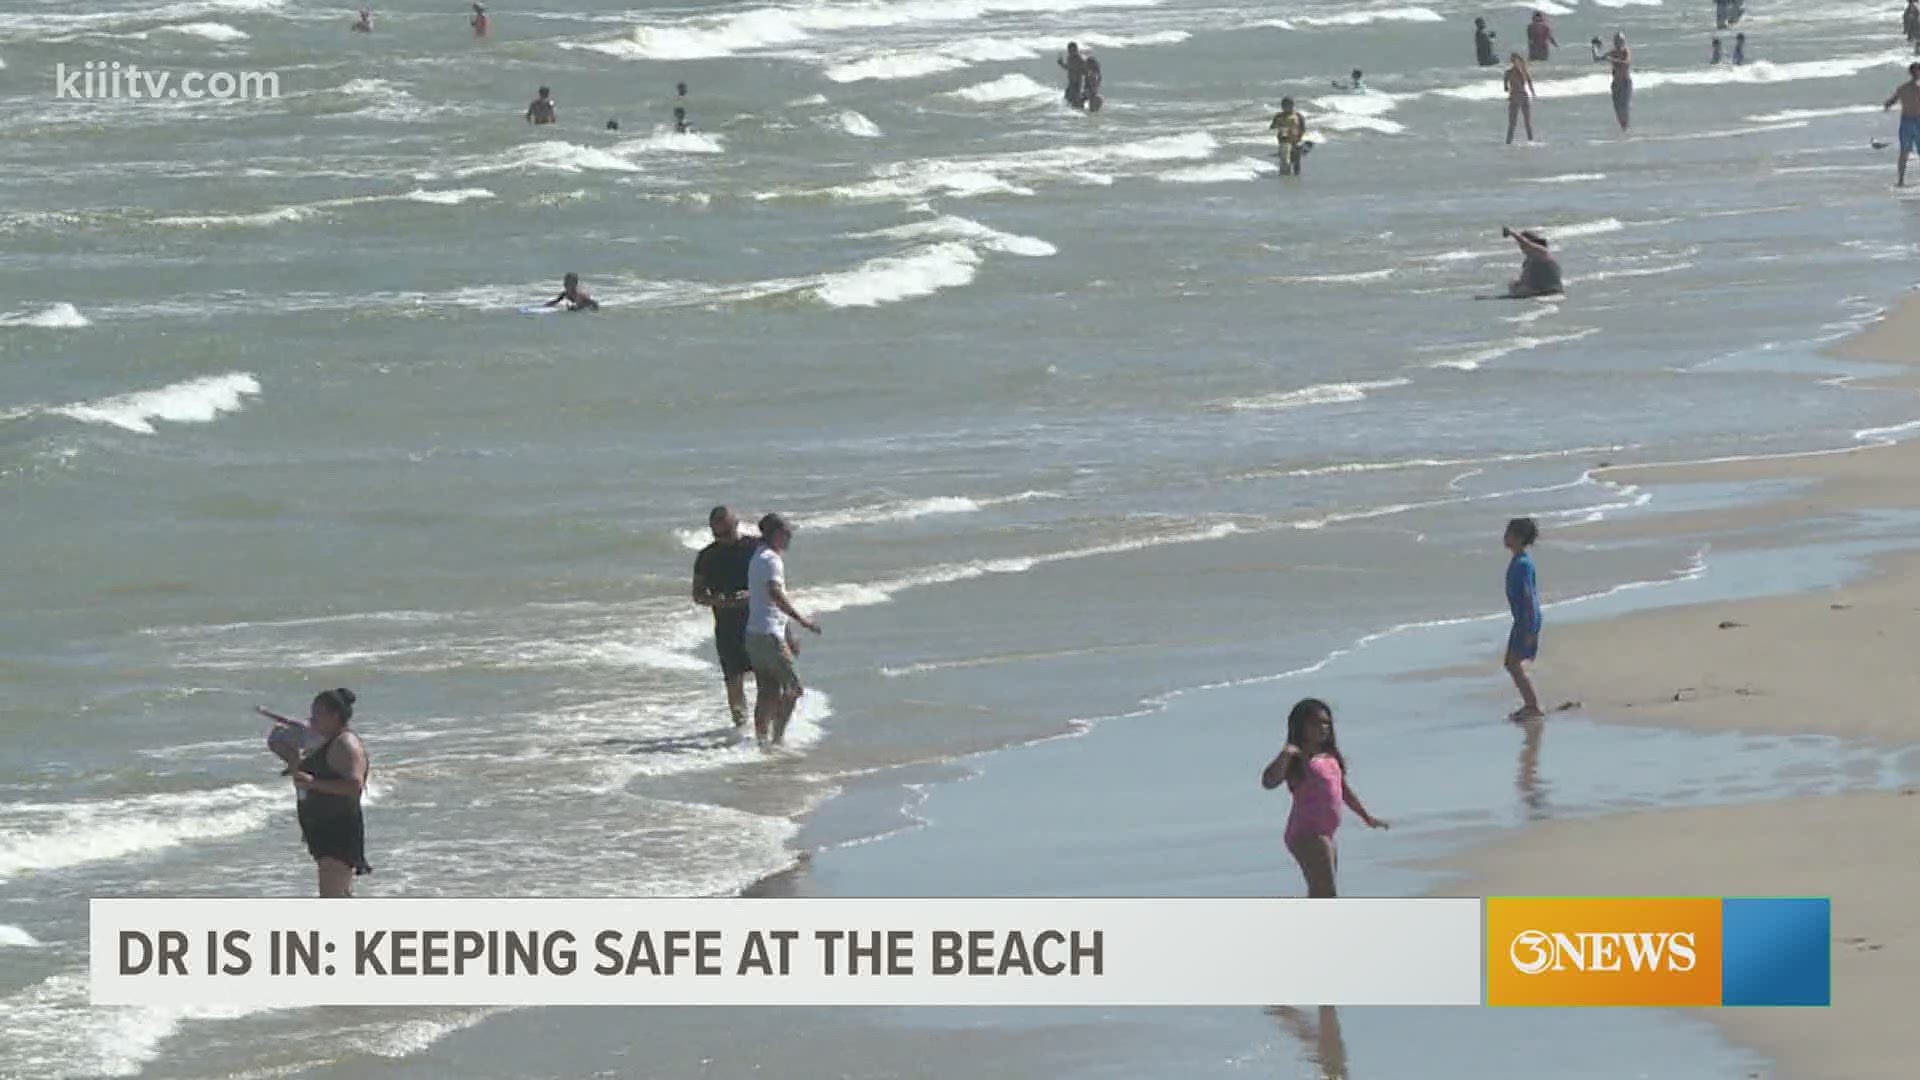 While you can reach the beach on foot, there are ways to stay safe